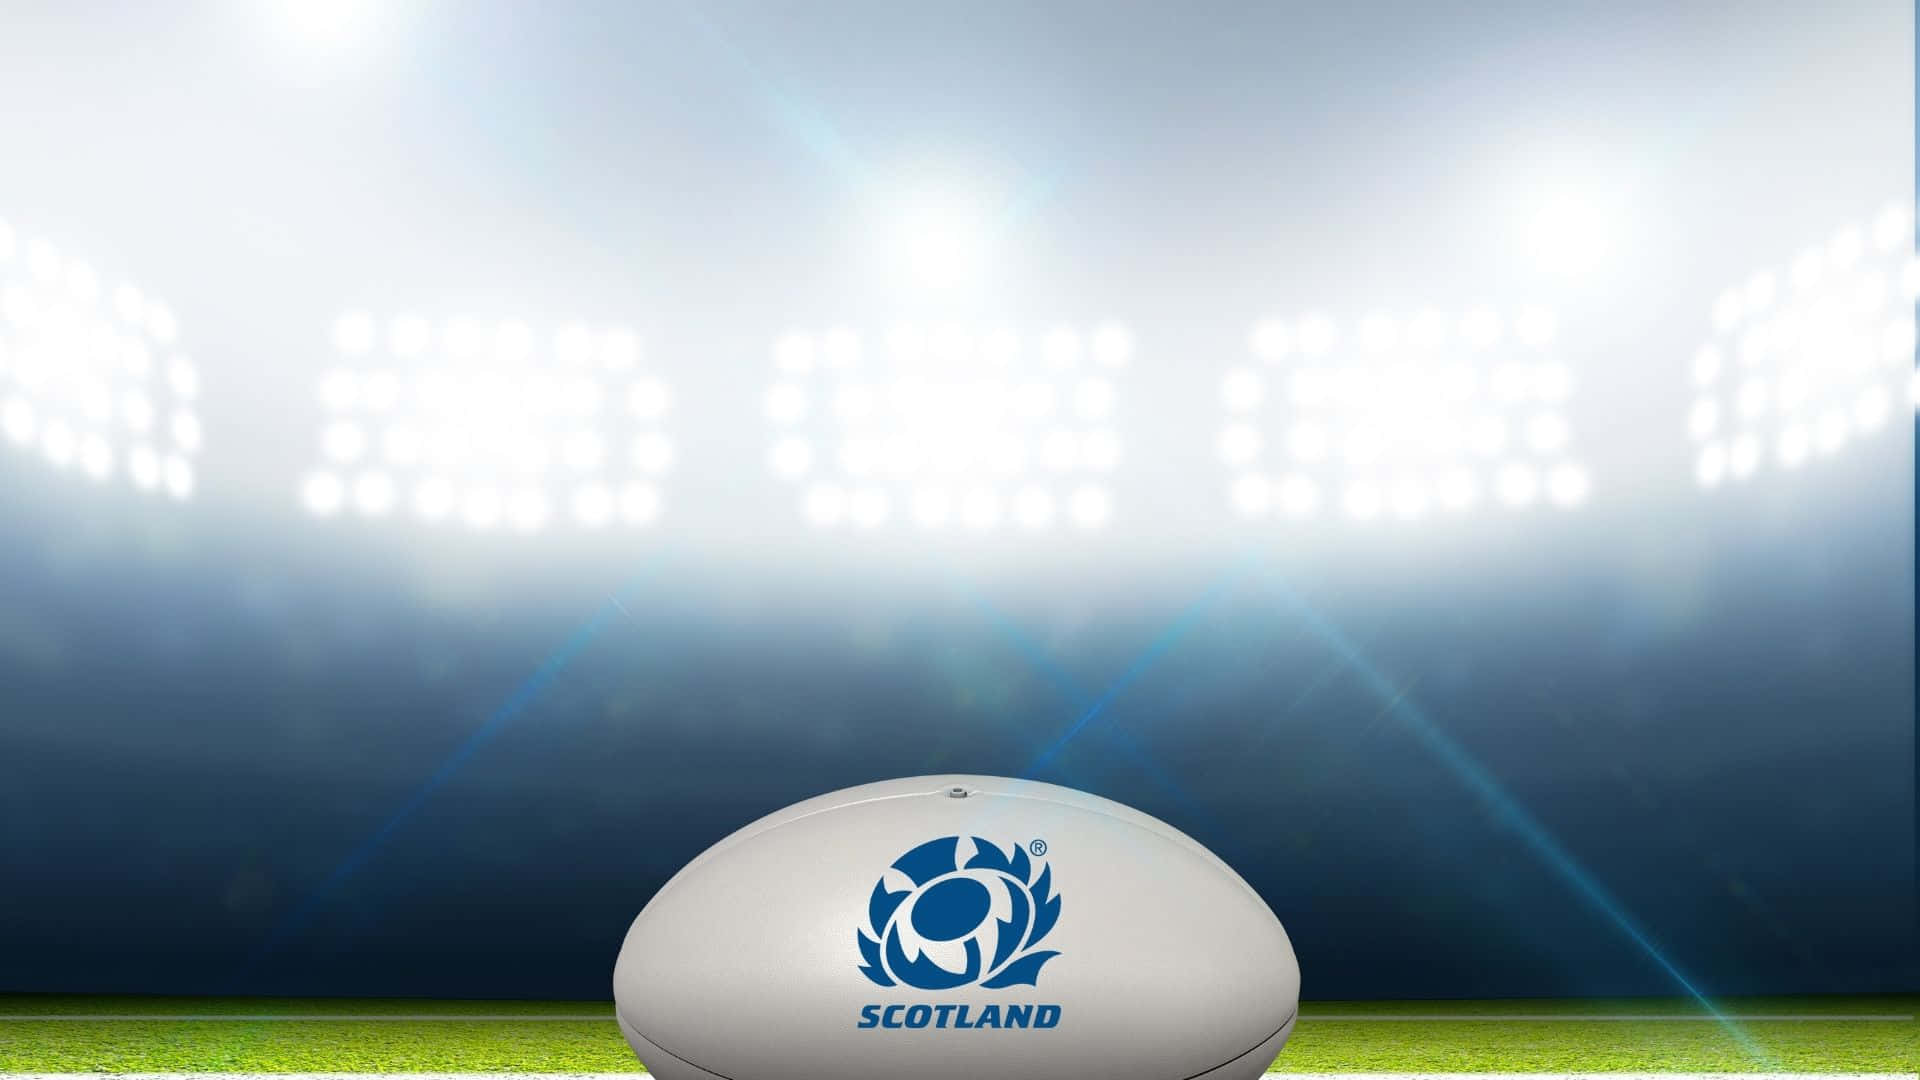 Captivating Scotland Rugby Team in Action Wallpaper